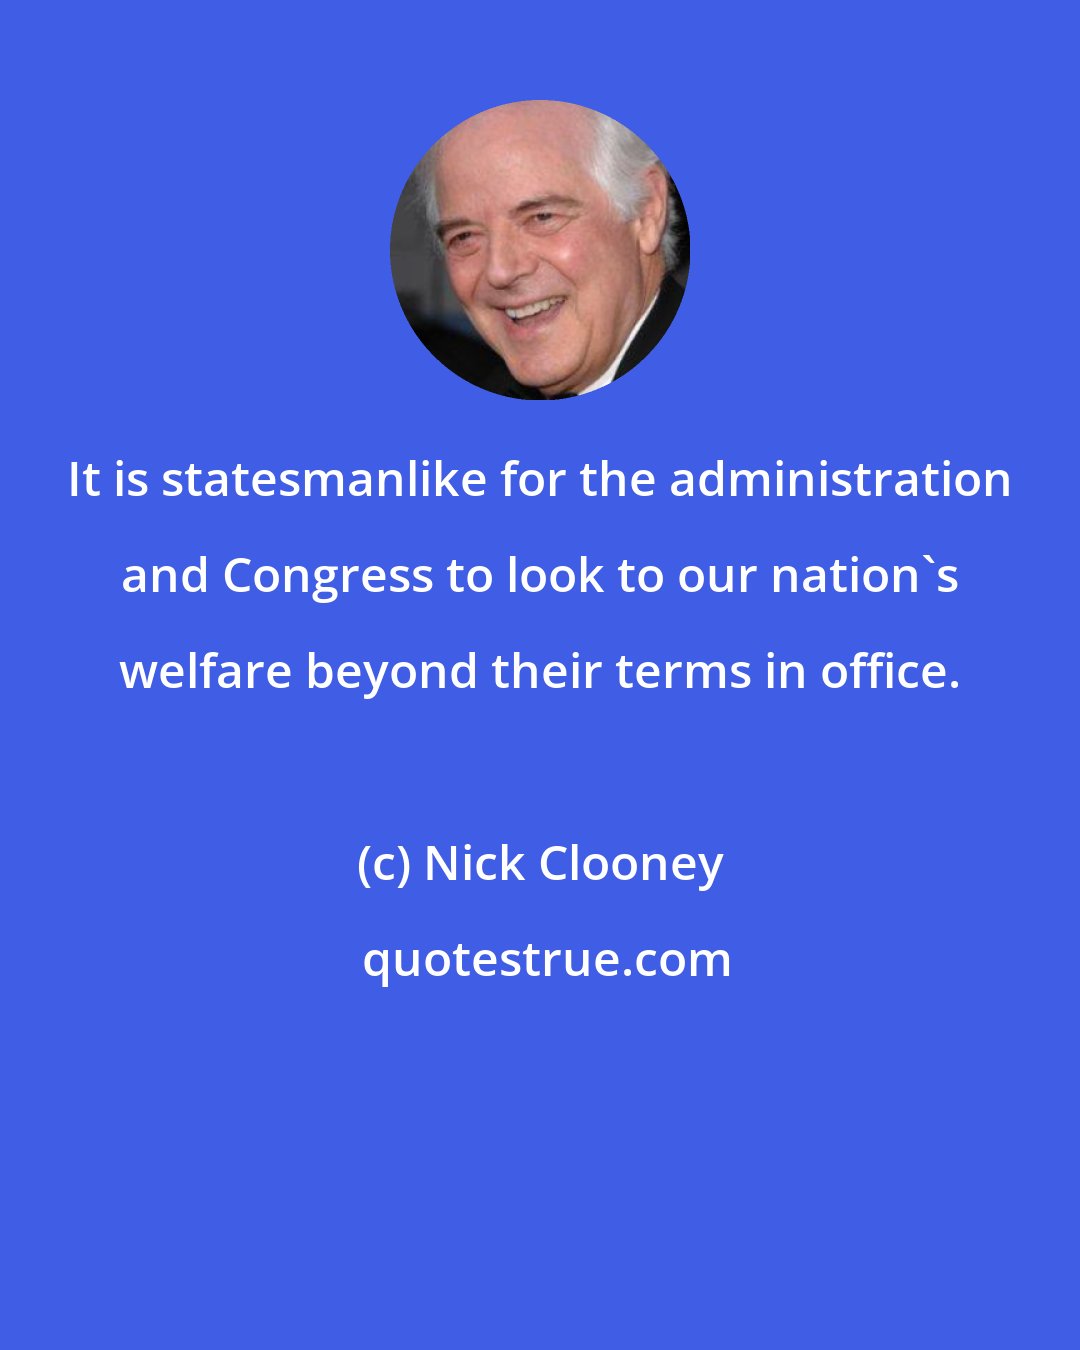 Nick Clooney: It is statesmanlike for the administration and Congress to look to our nation's welfare beyond their terms in office.